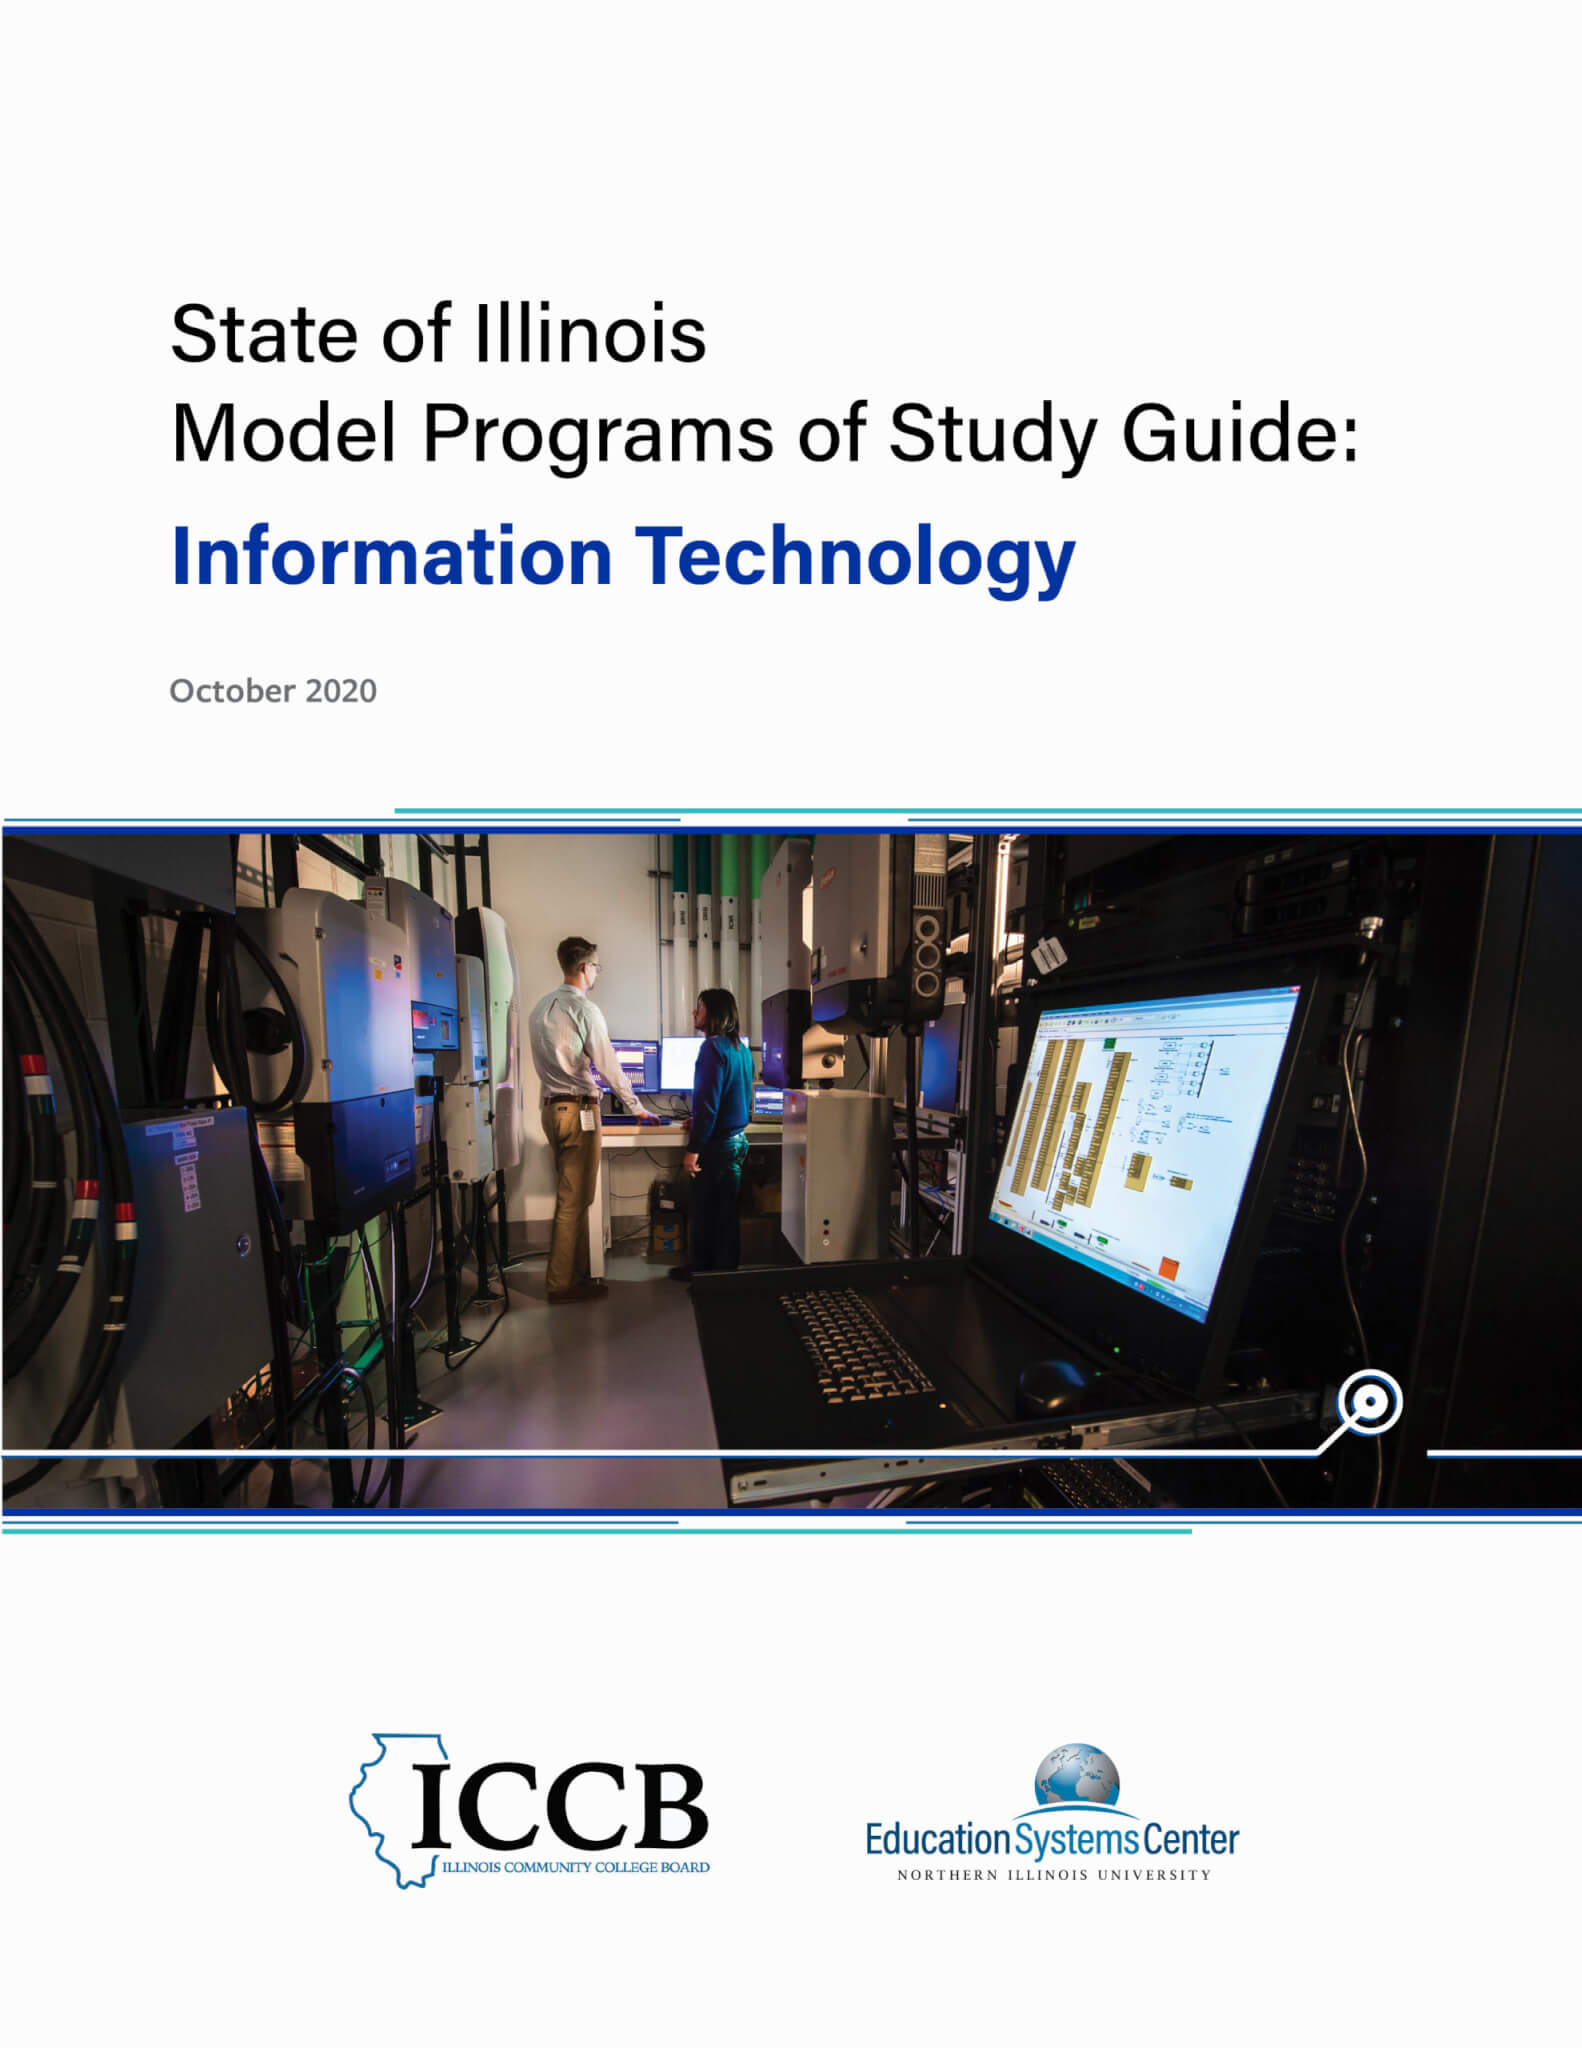 Report cover for "Model Programs of Study Guide - Information Technology" released October 2020 by Illinois Community College Board and Education Systems Center at Northern Illinois University